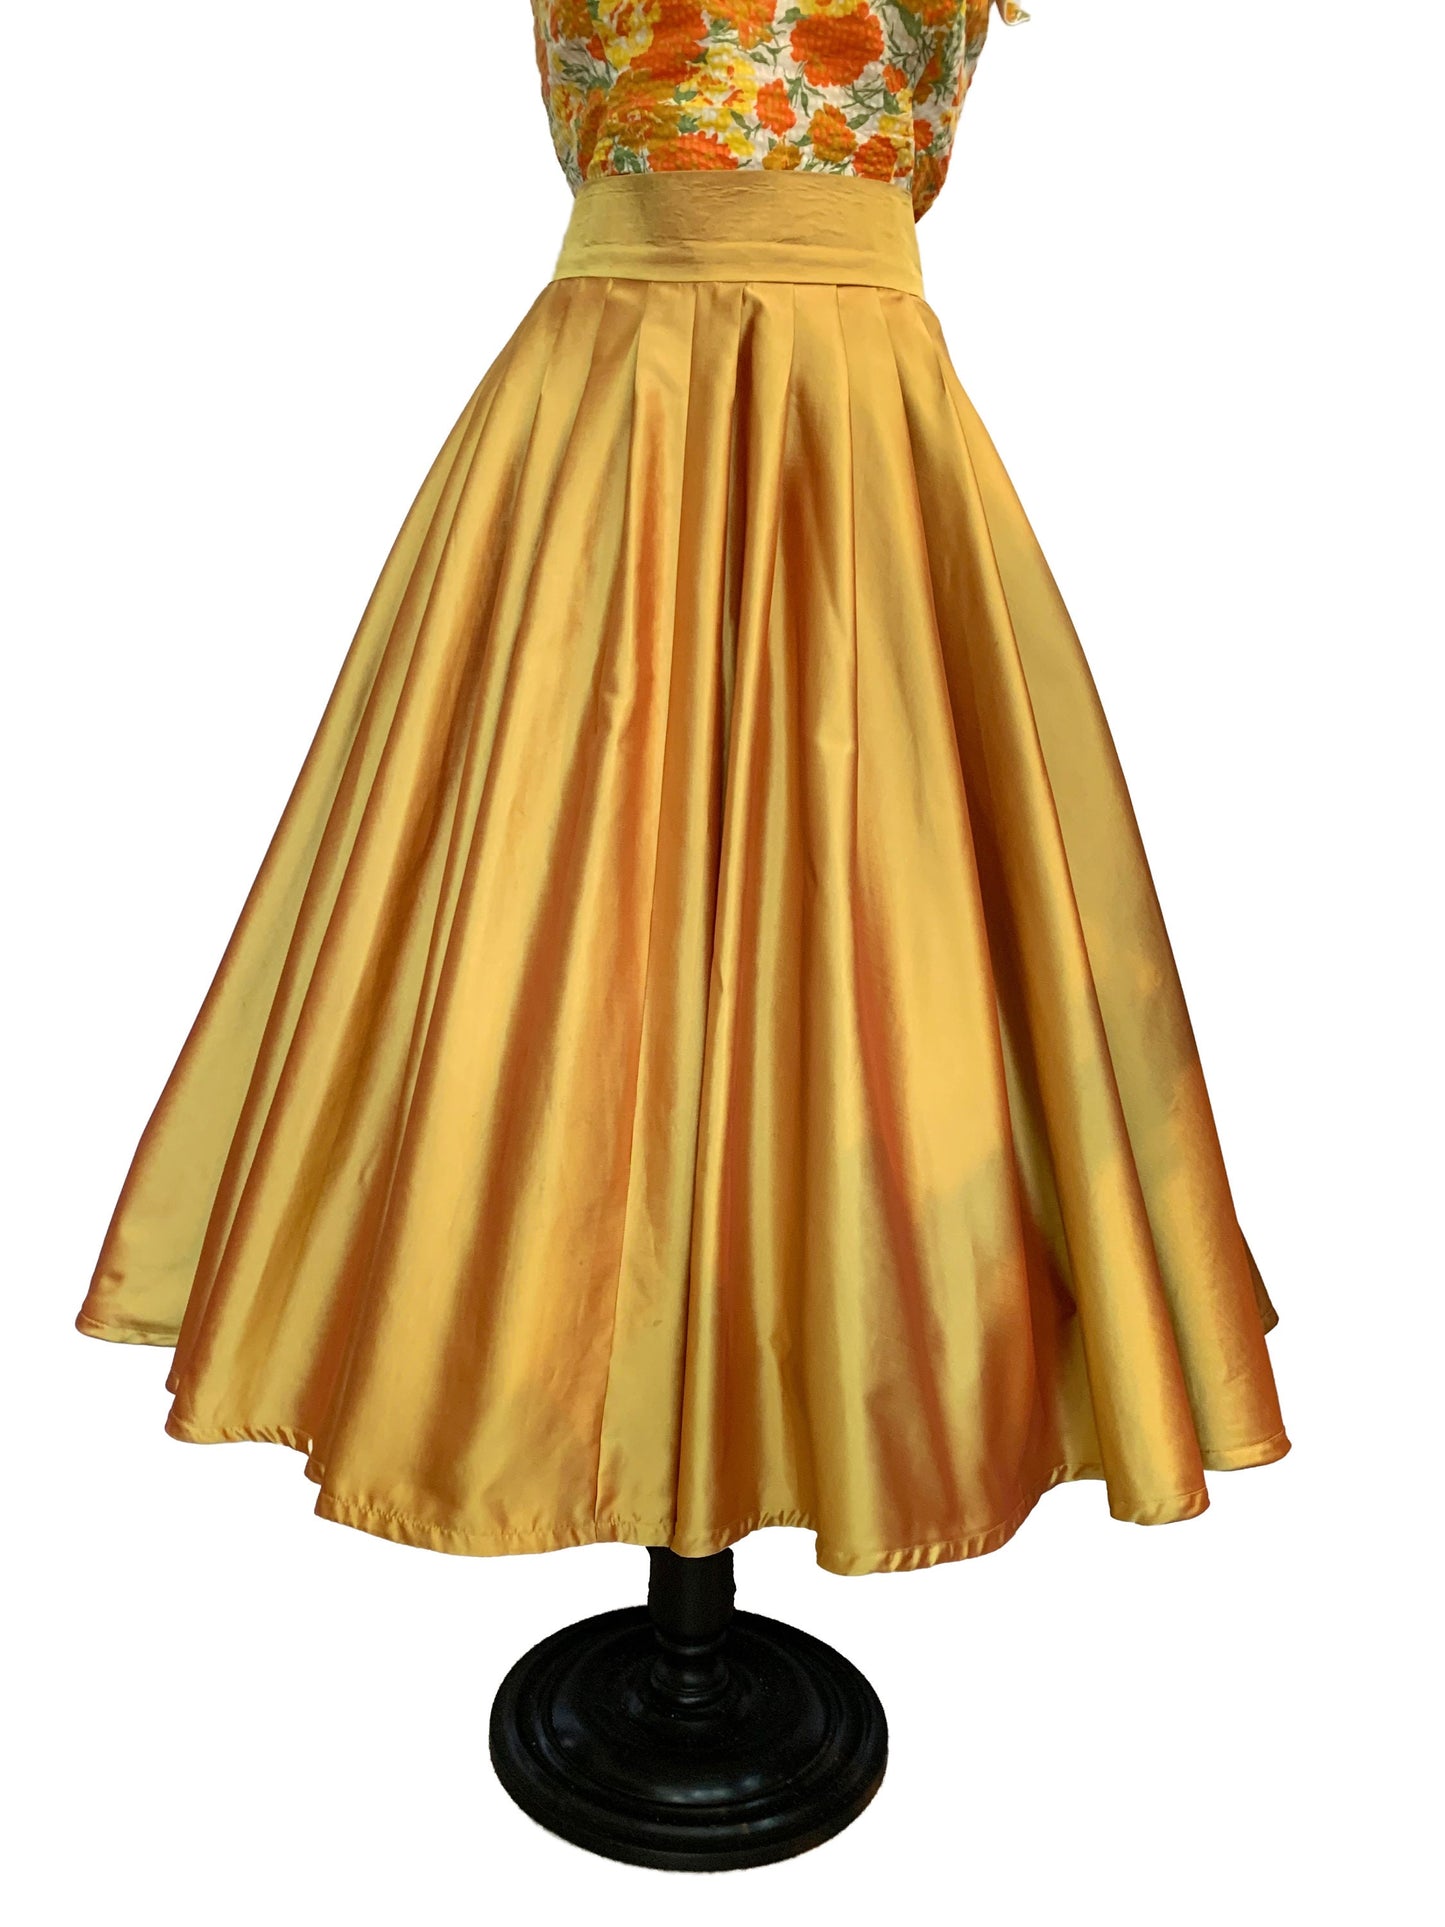 Vintage Style Two Tone Changeant Swing Skirt | XL/XXL